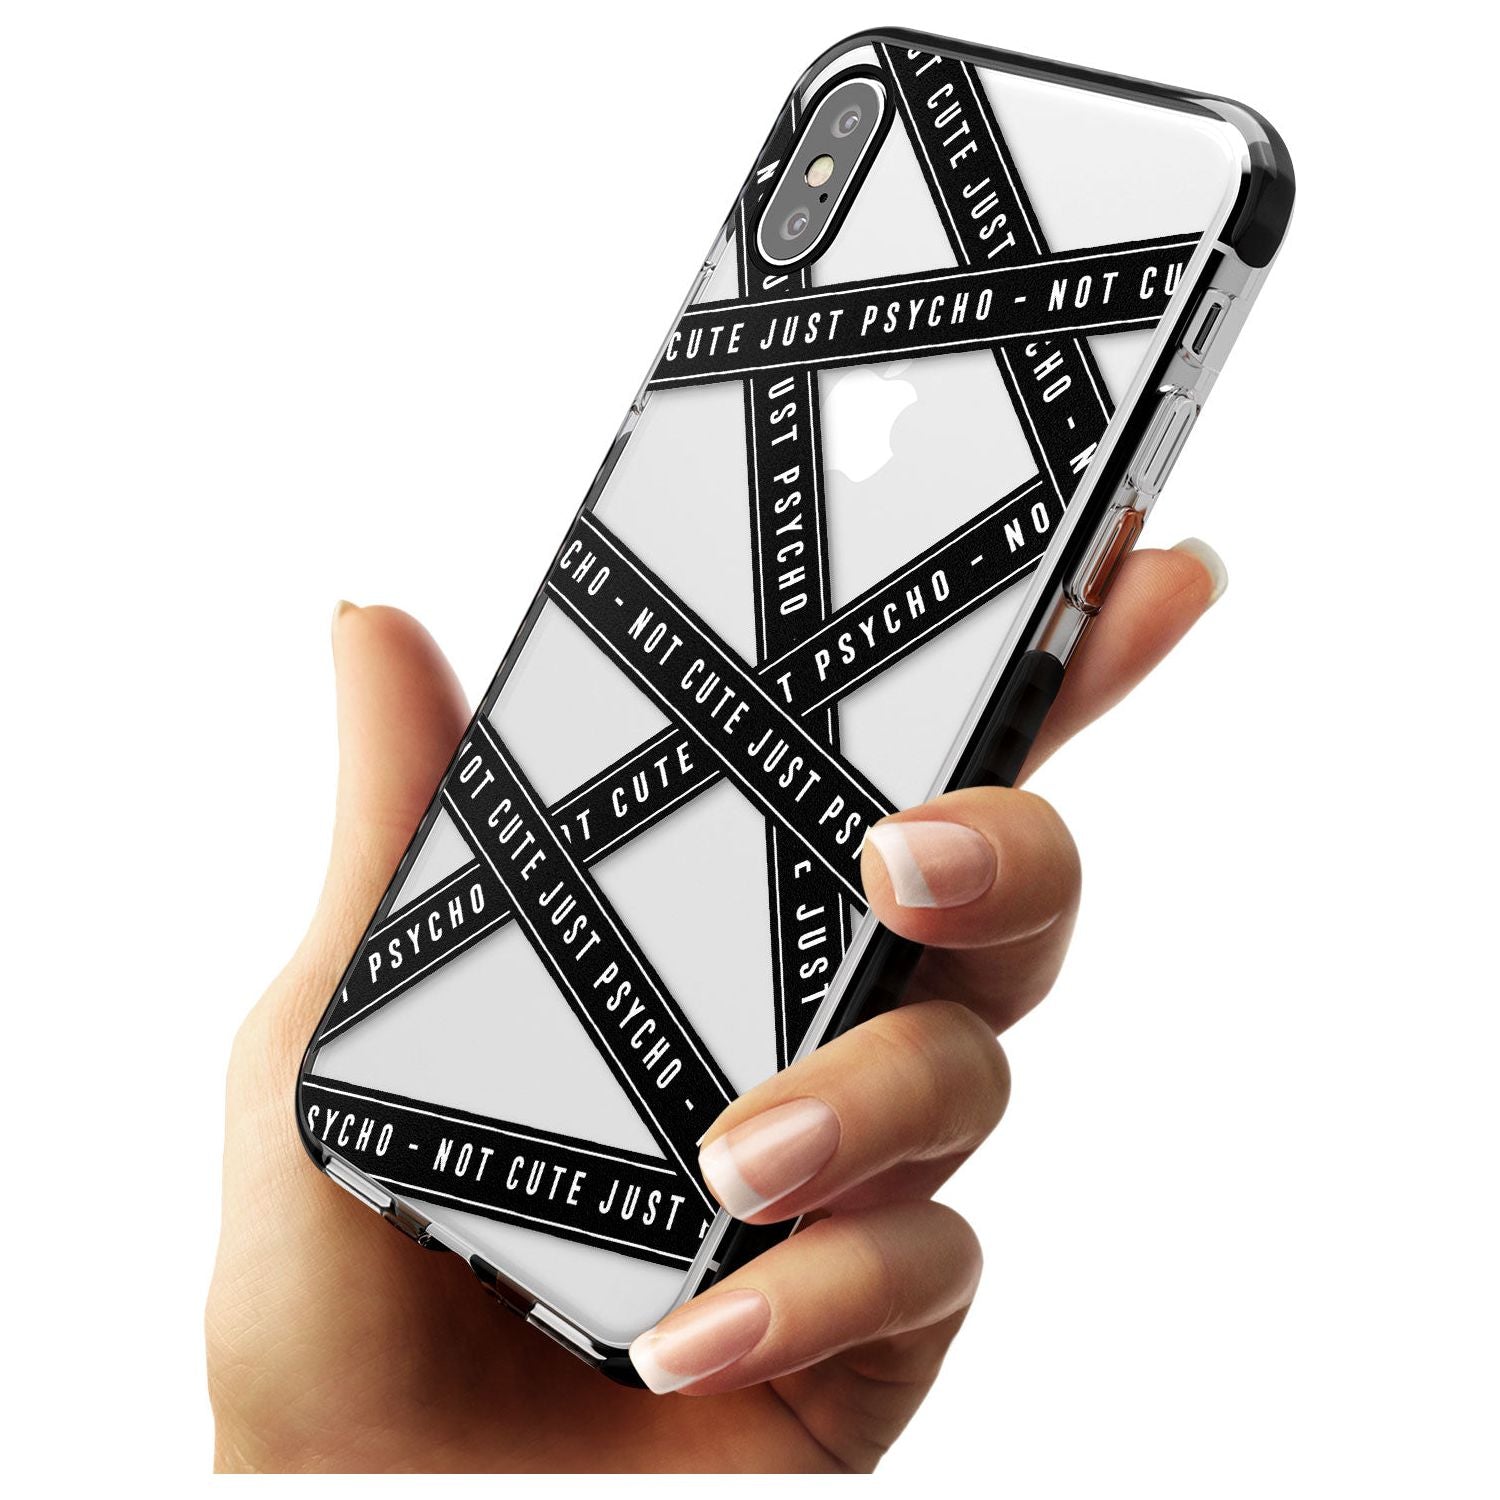 Caution Tape (Clear) Not Cute Just Psycho Black Impact Phone Case for iPhone X XS Max XR